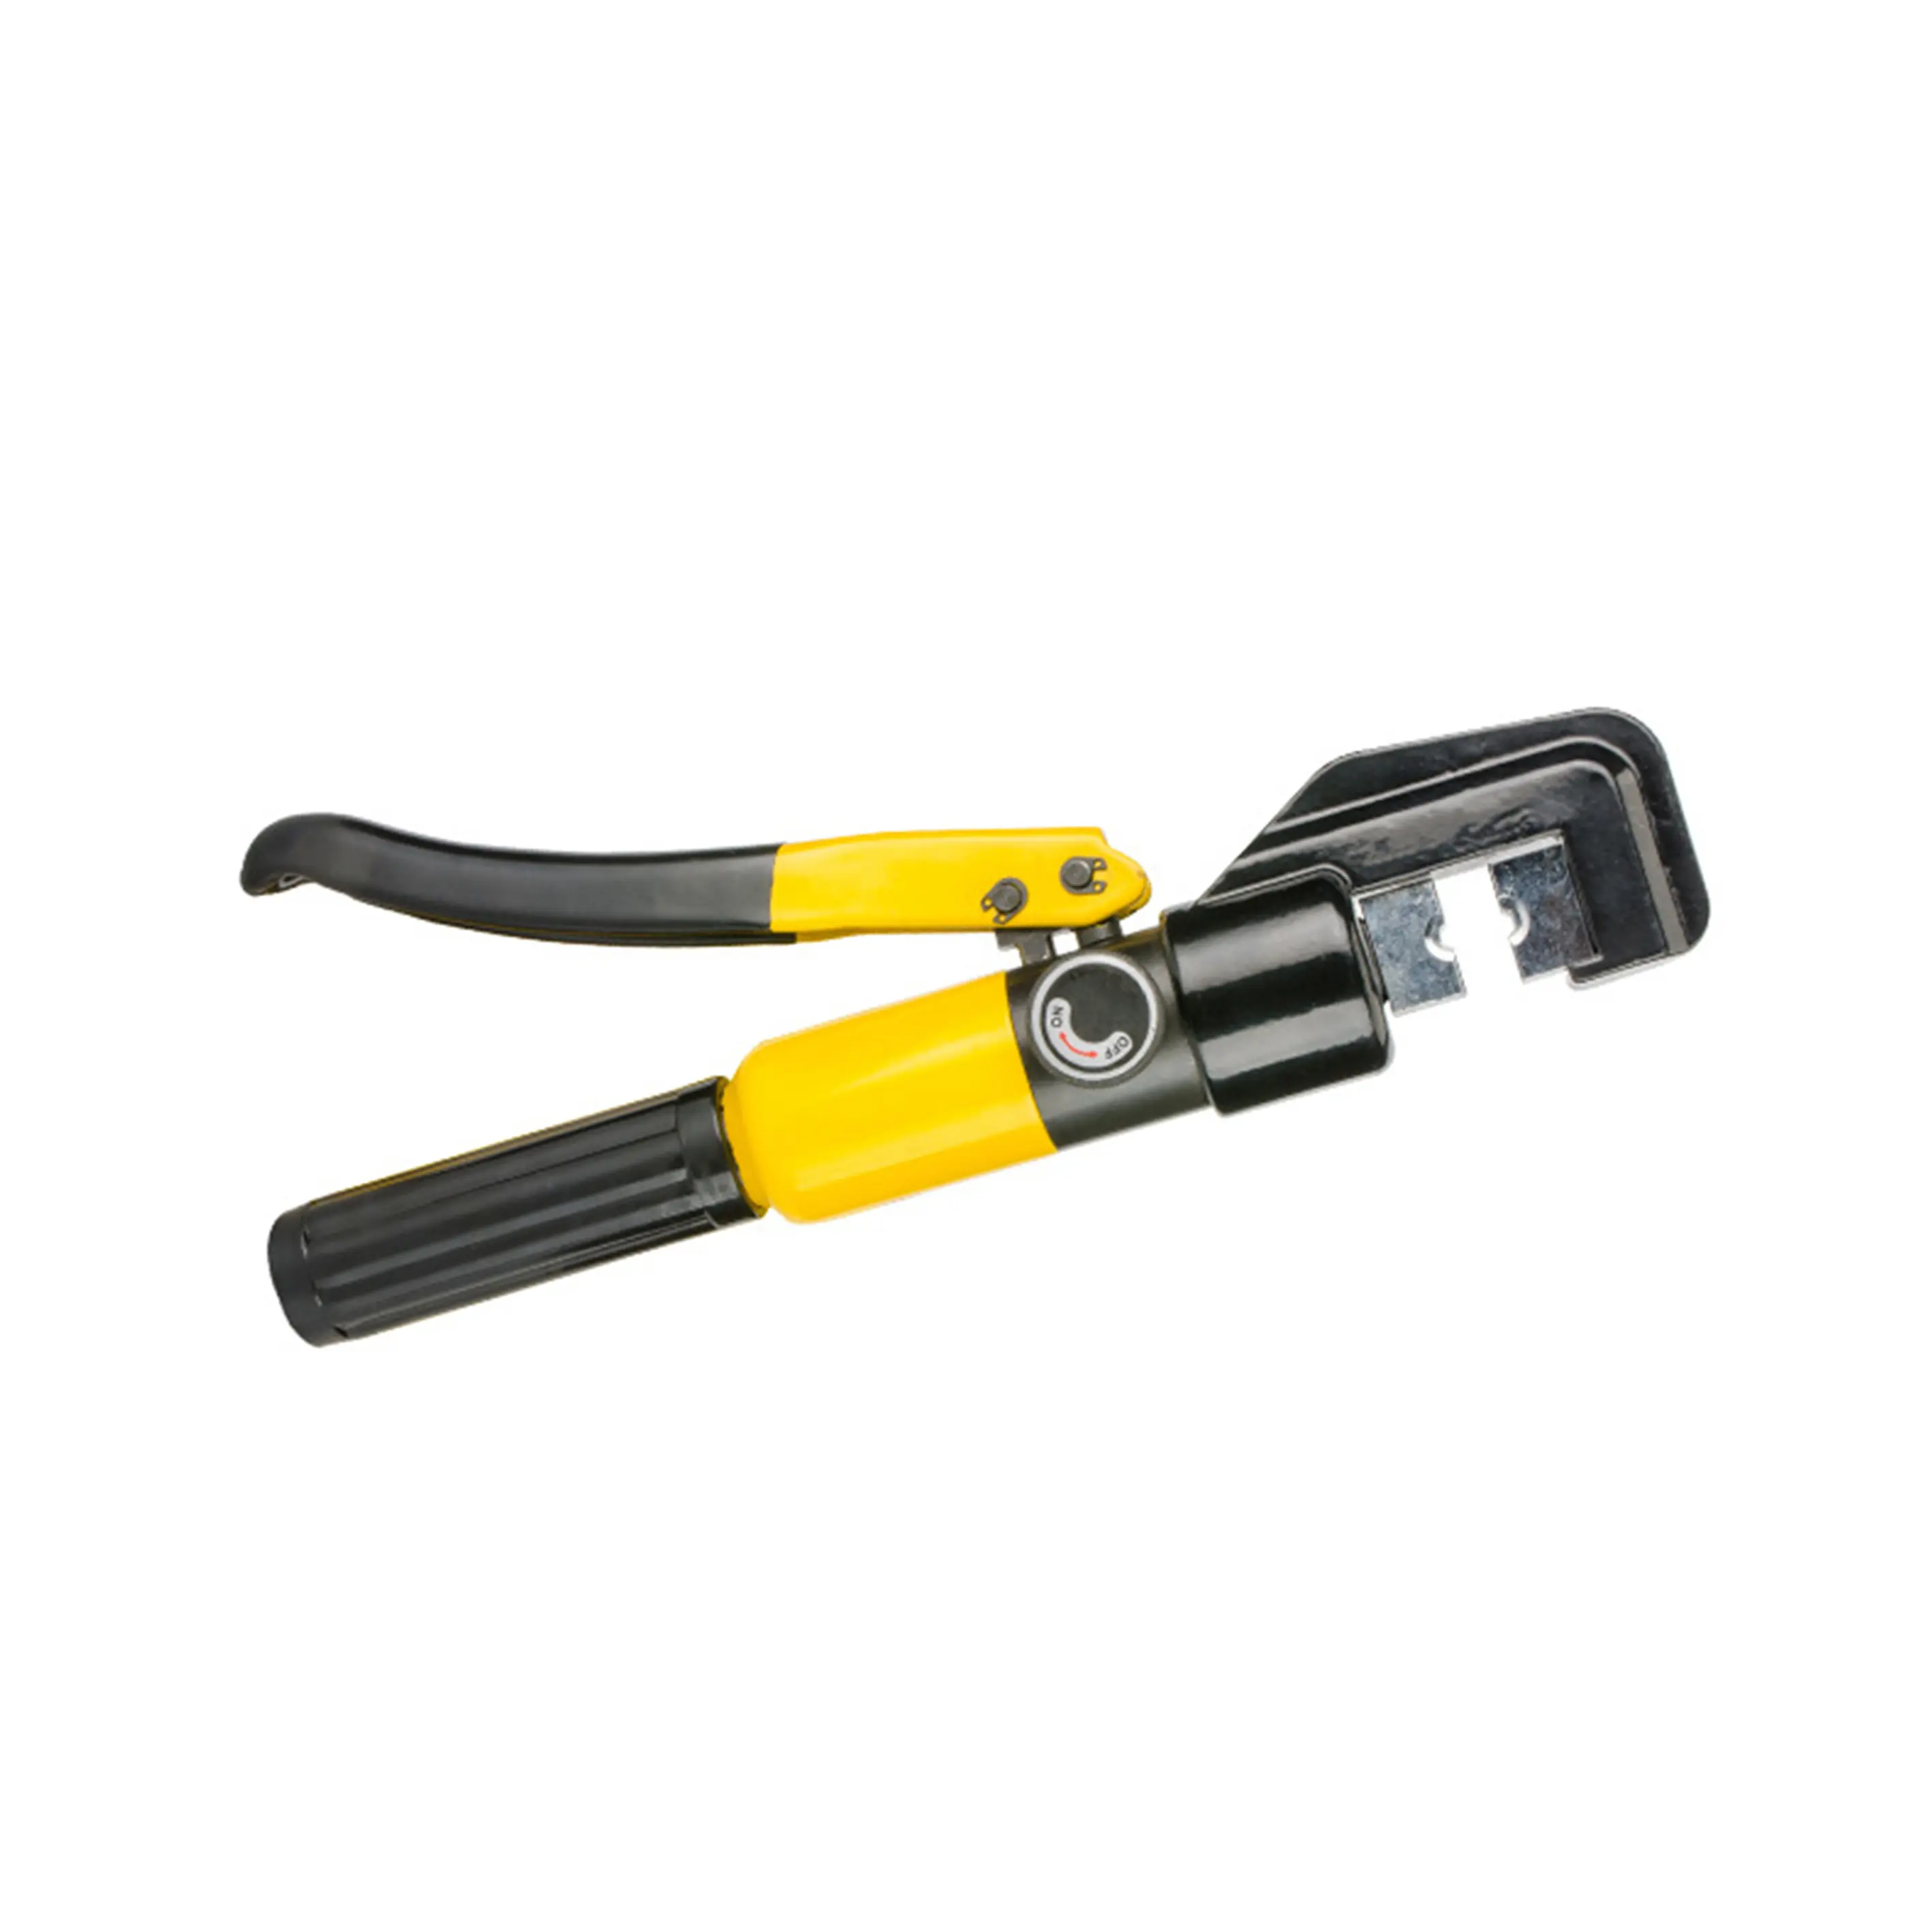 Yqk-300/HHY-300A Handheld Portable Cu 16-300mm2 Manual Hydraulic Cable Pipe Crimping Tool Clamp